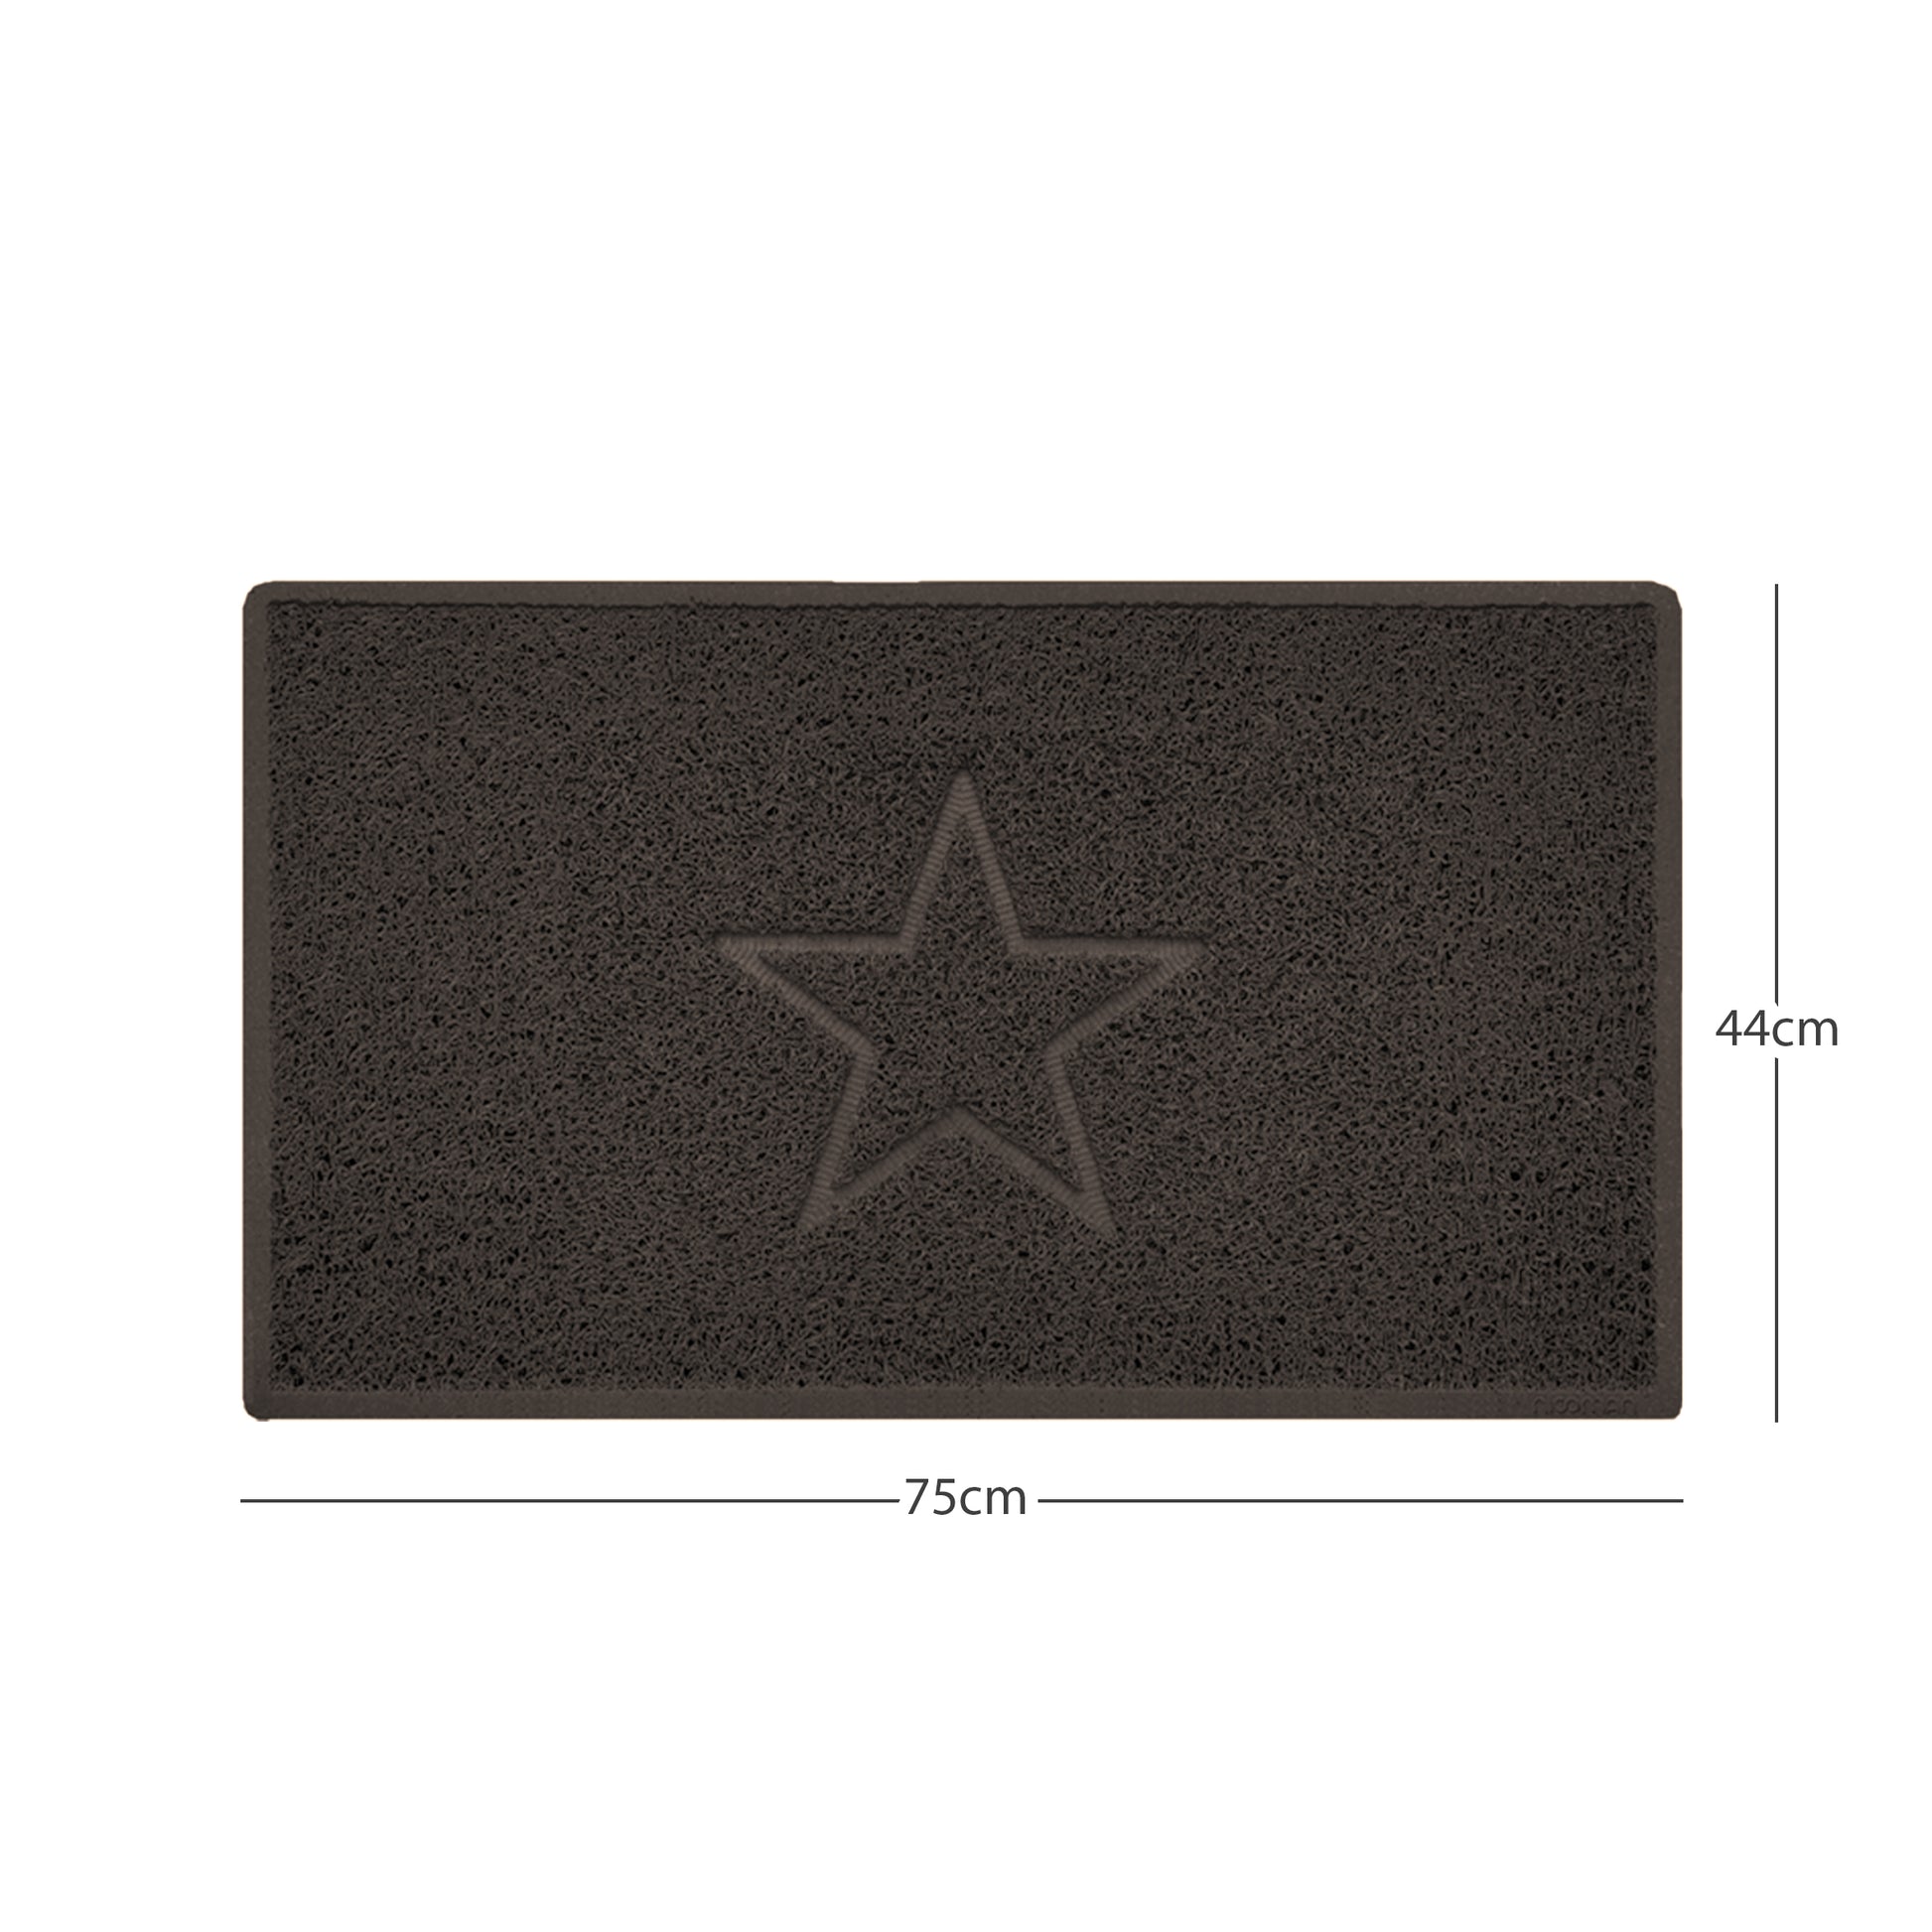 nicoman brown spaghetti indoor mat, multi colour options, free delivery, uk made